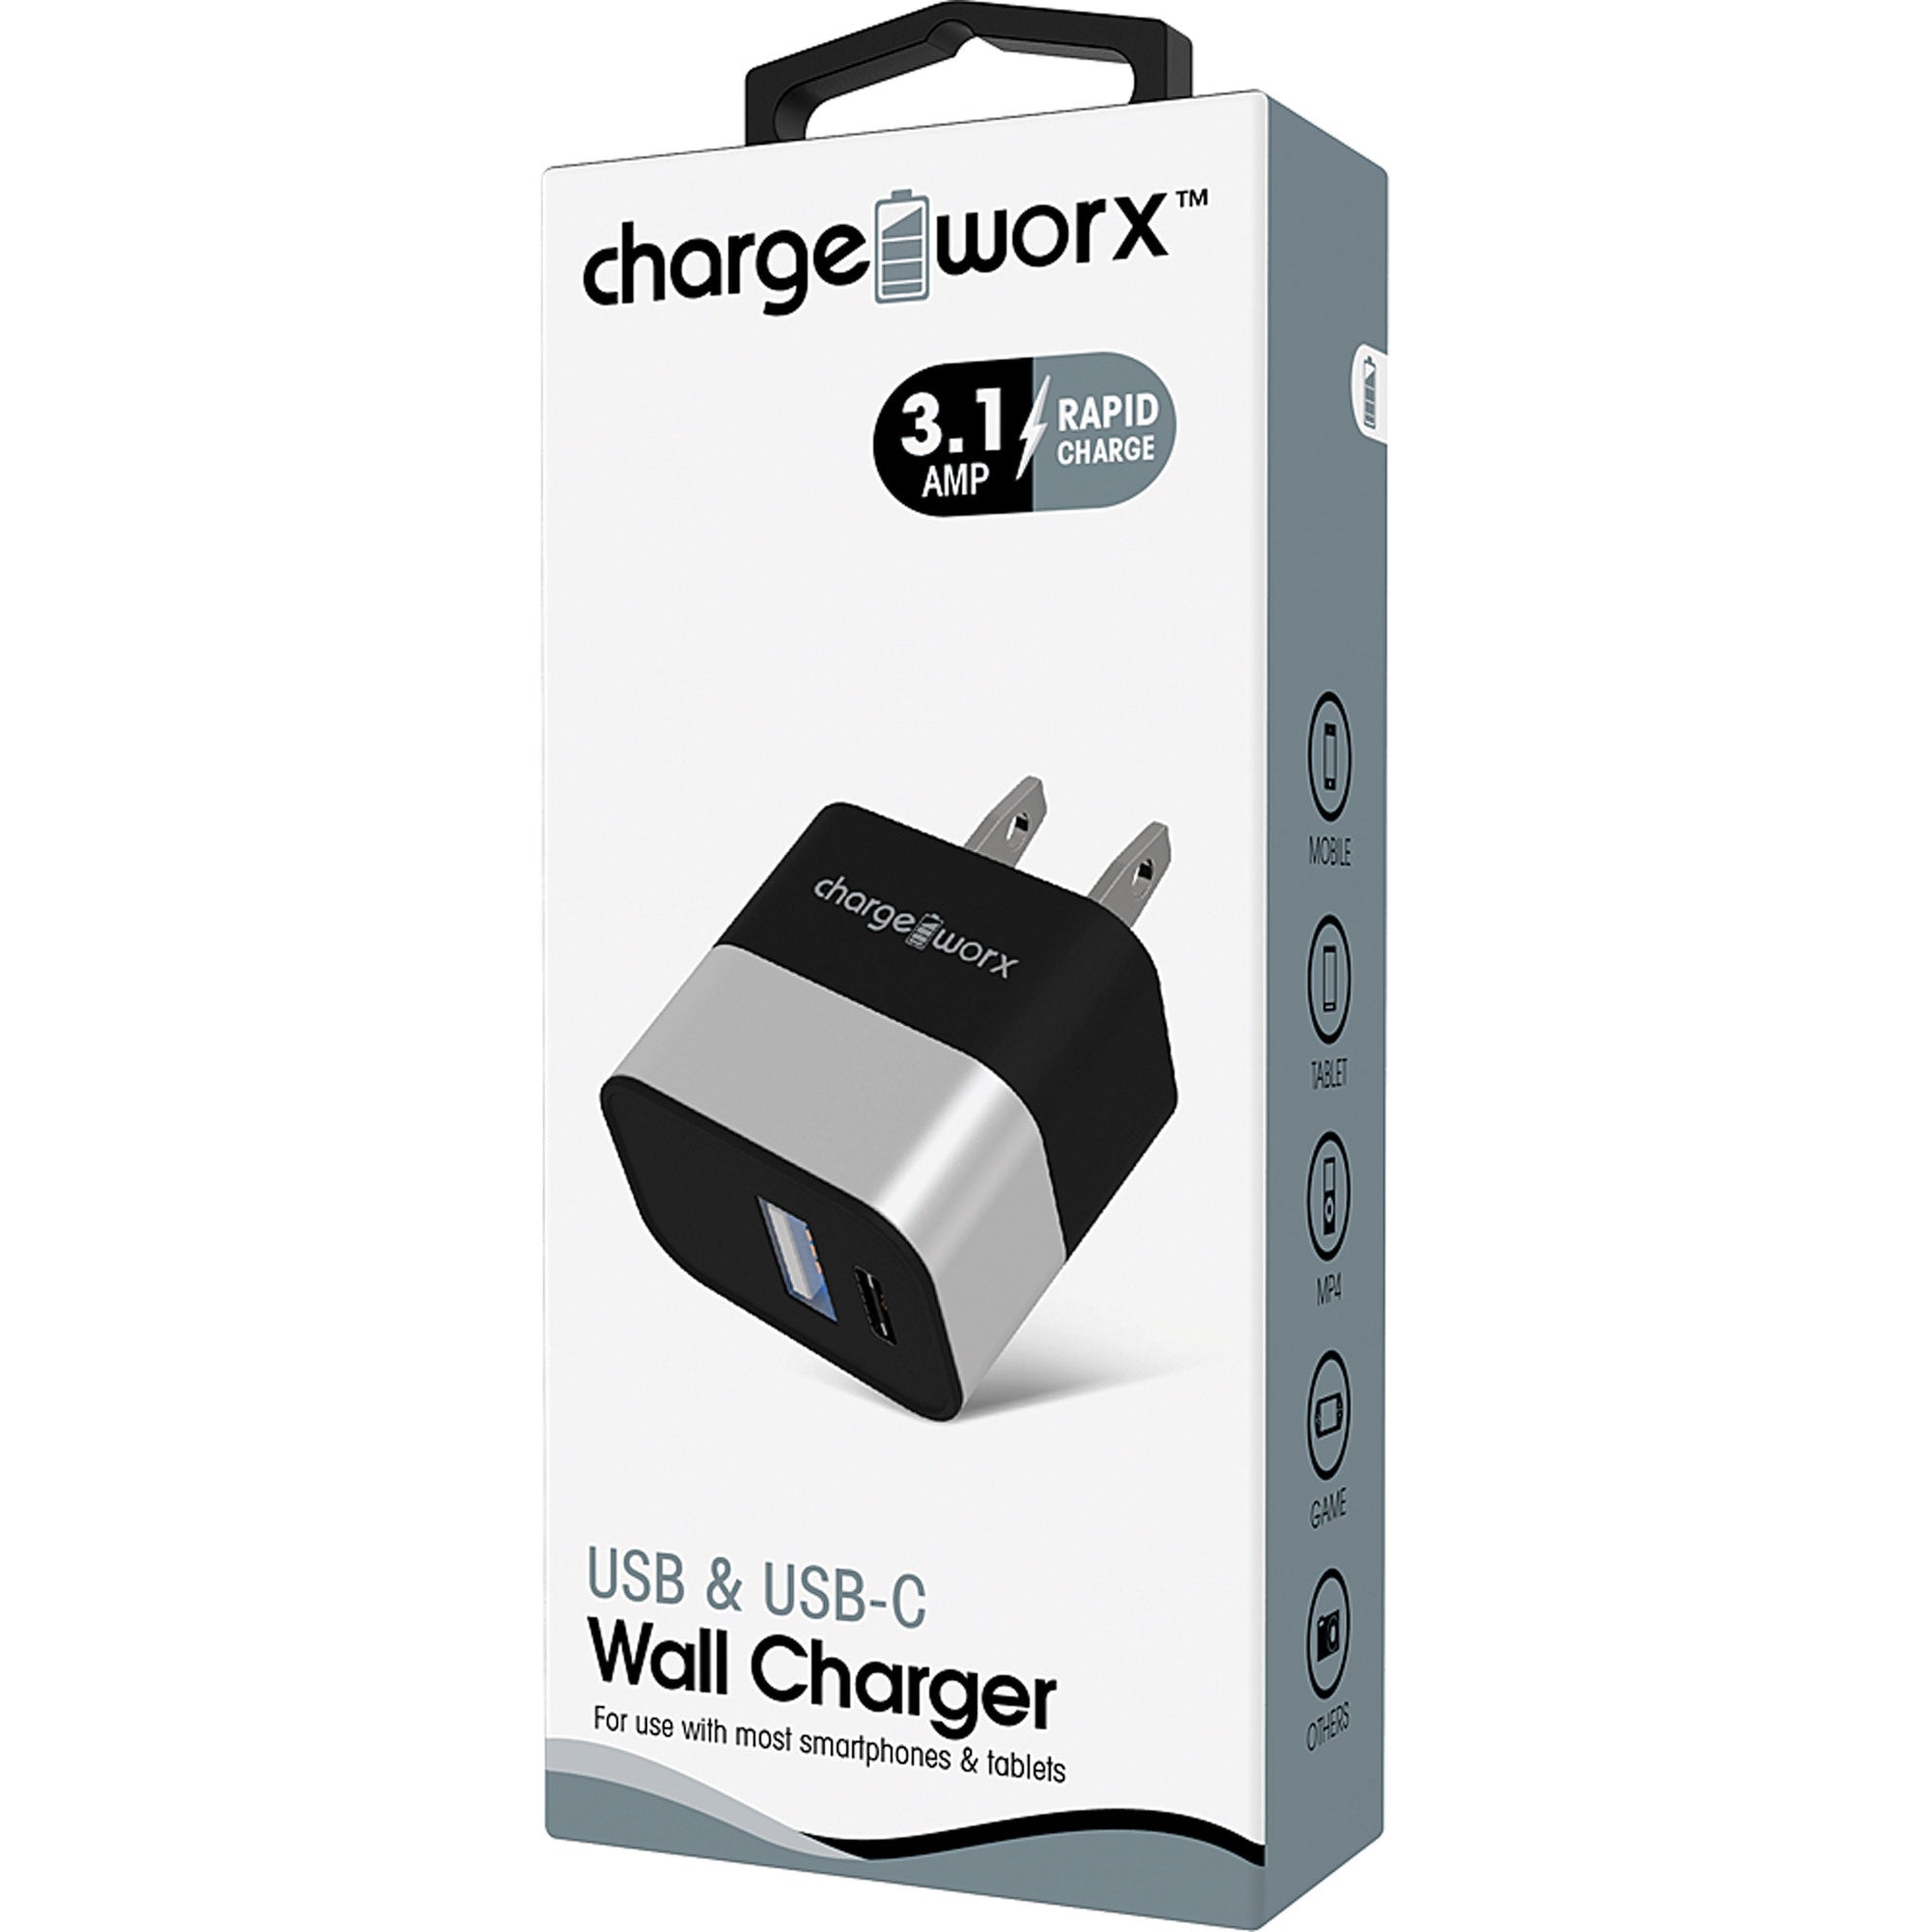 ChargeWorx 3.1A Dual USB & USB-C Wall Charger